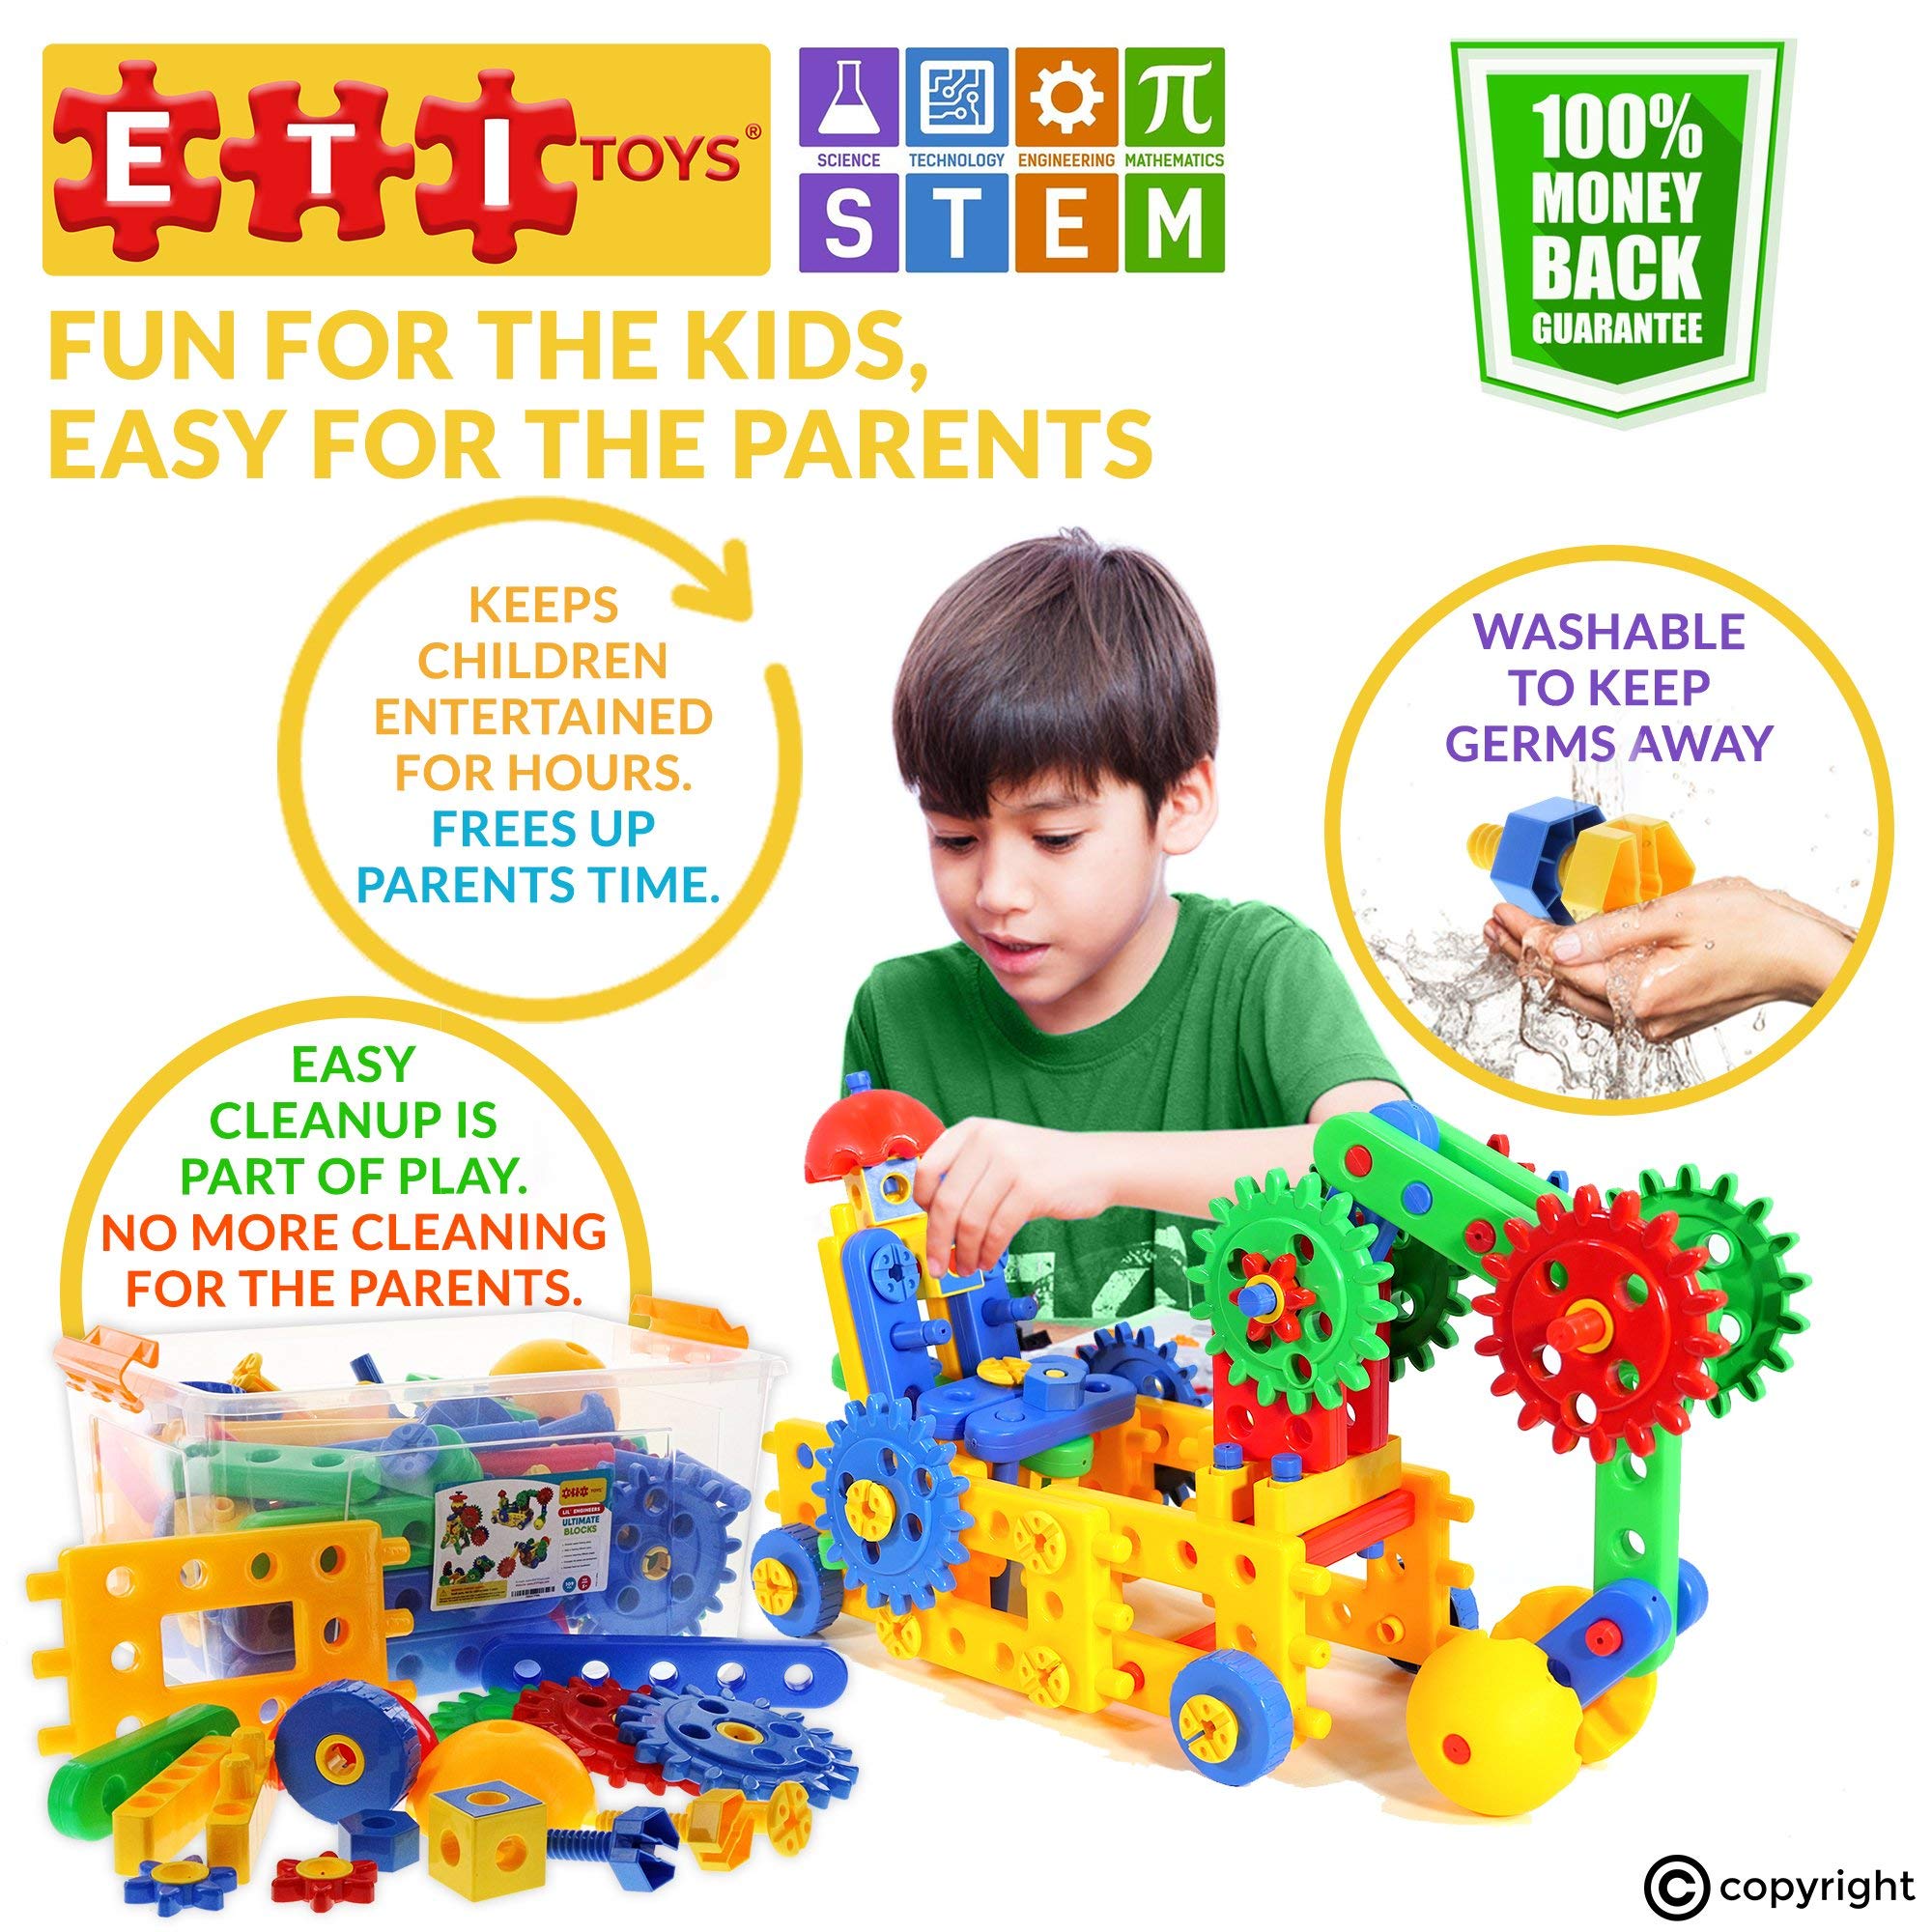 ETI Toys, STEM Learning, 109 Piece Educational Engineering Construction Blocks & Gears Building Set. Build Excavator, Horse & Buggy and More. Gift, Toy for 4, 5, 6, 7 Year Old Boys and Girls